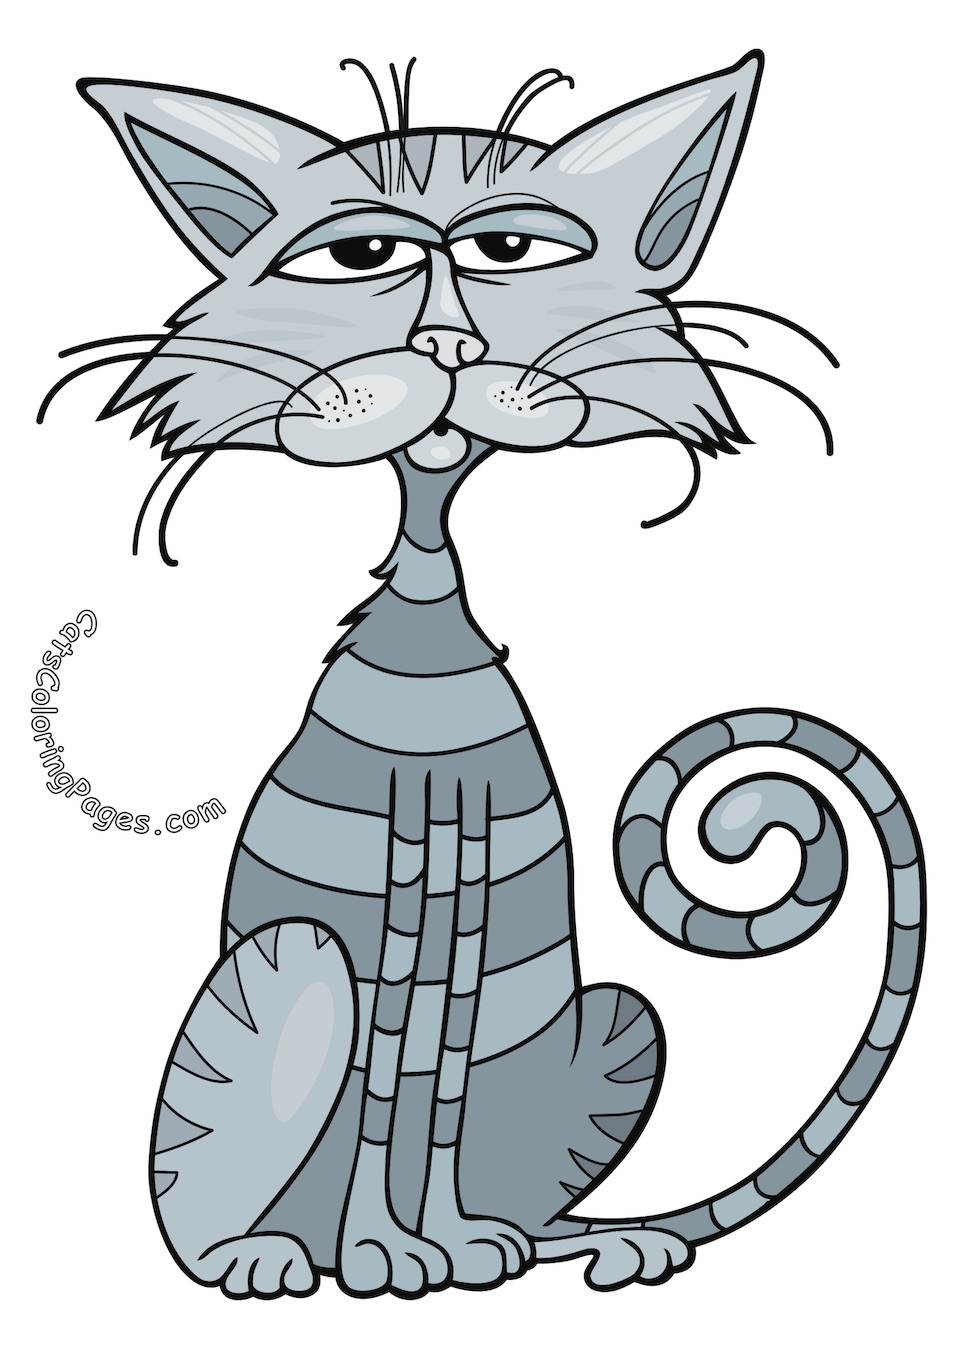 Blue Tomcat Colored Coloring Page